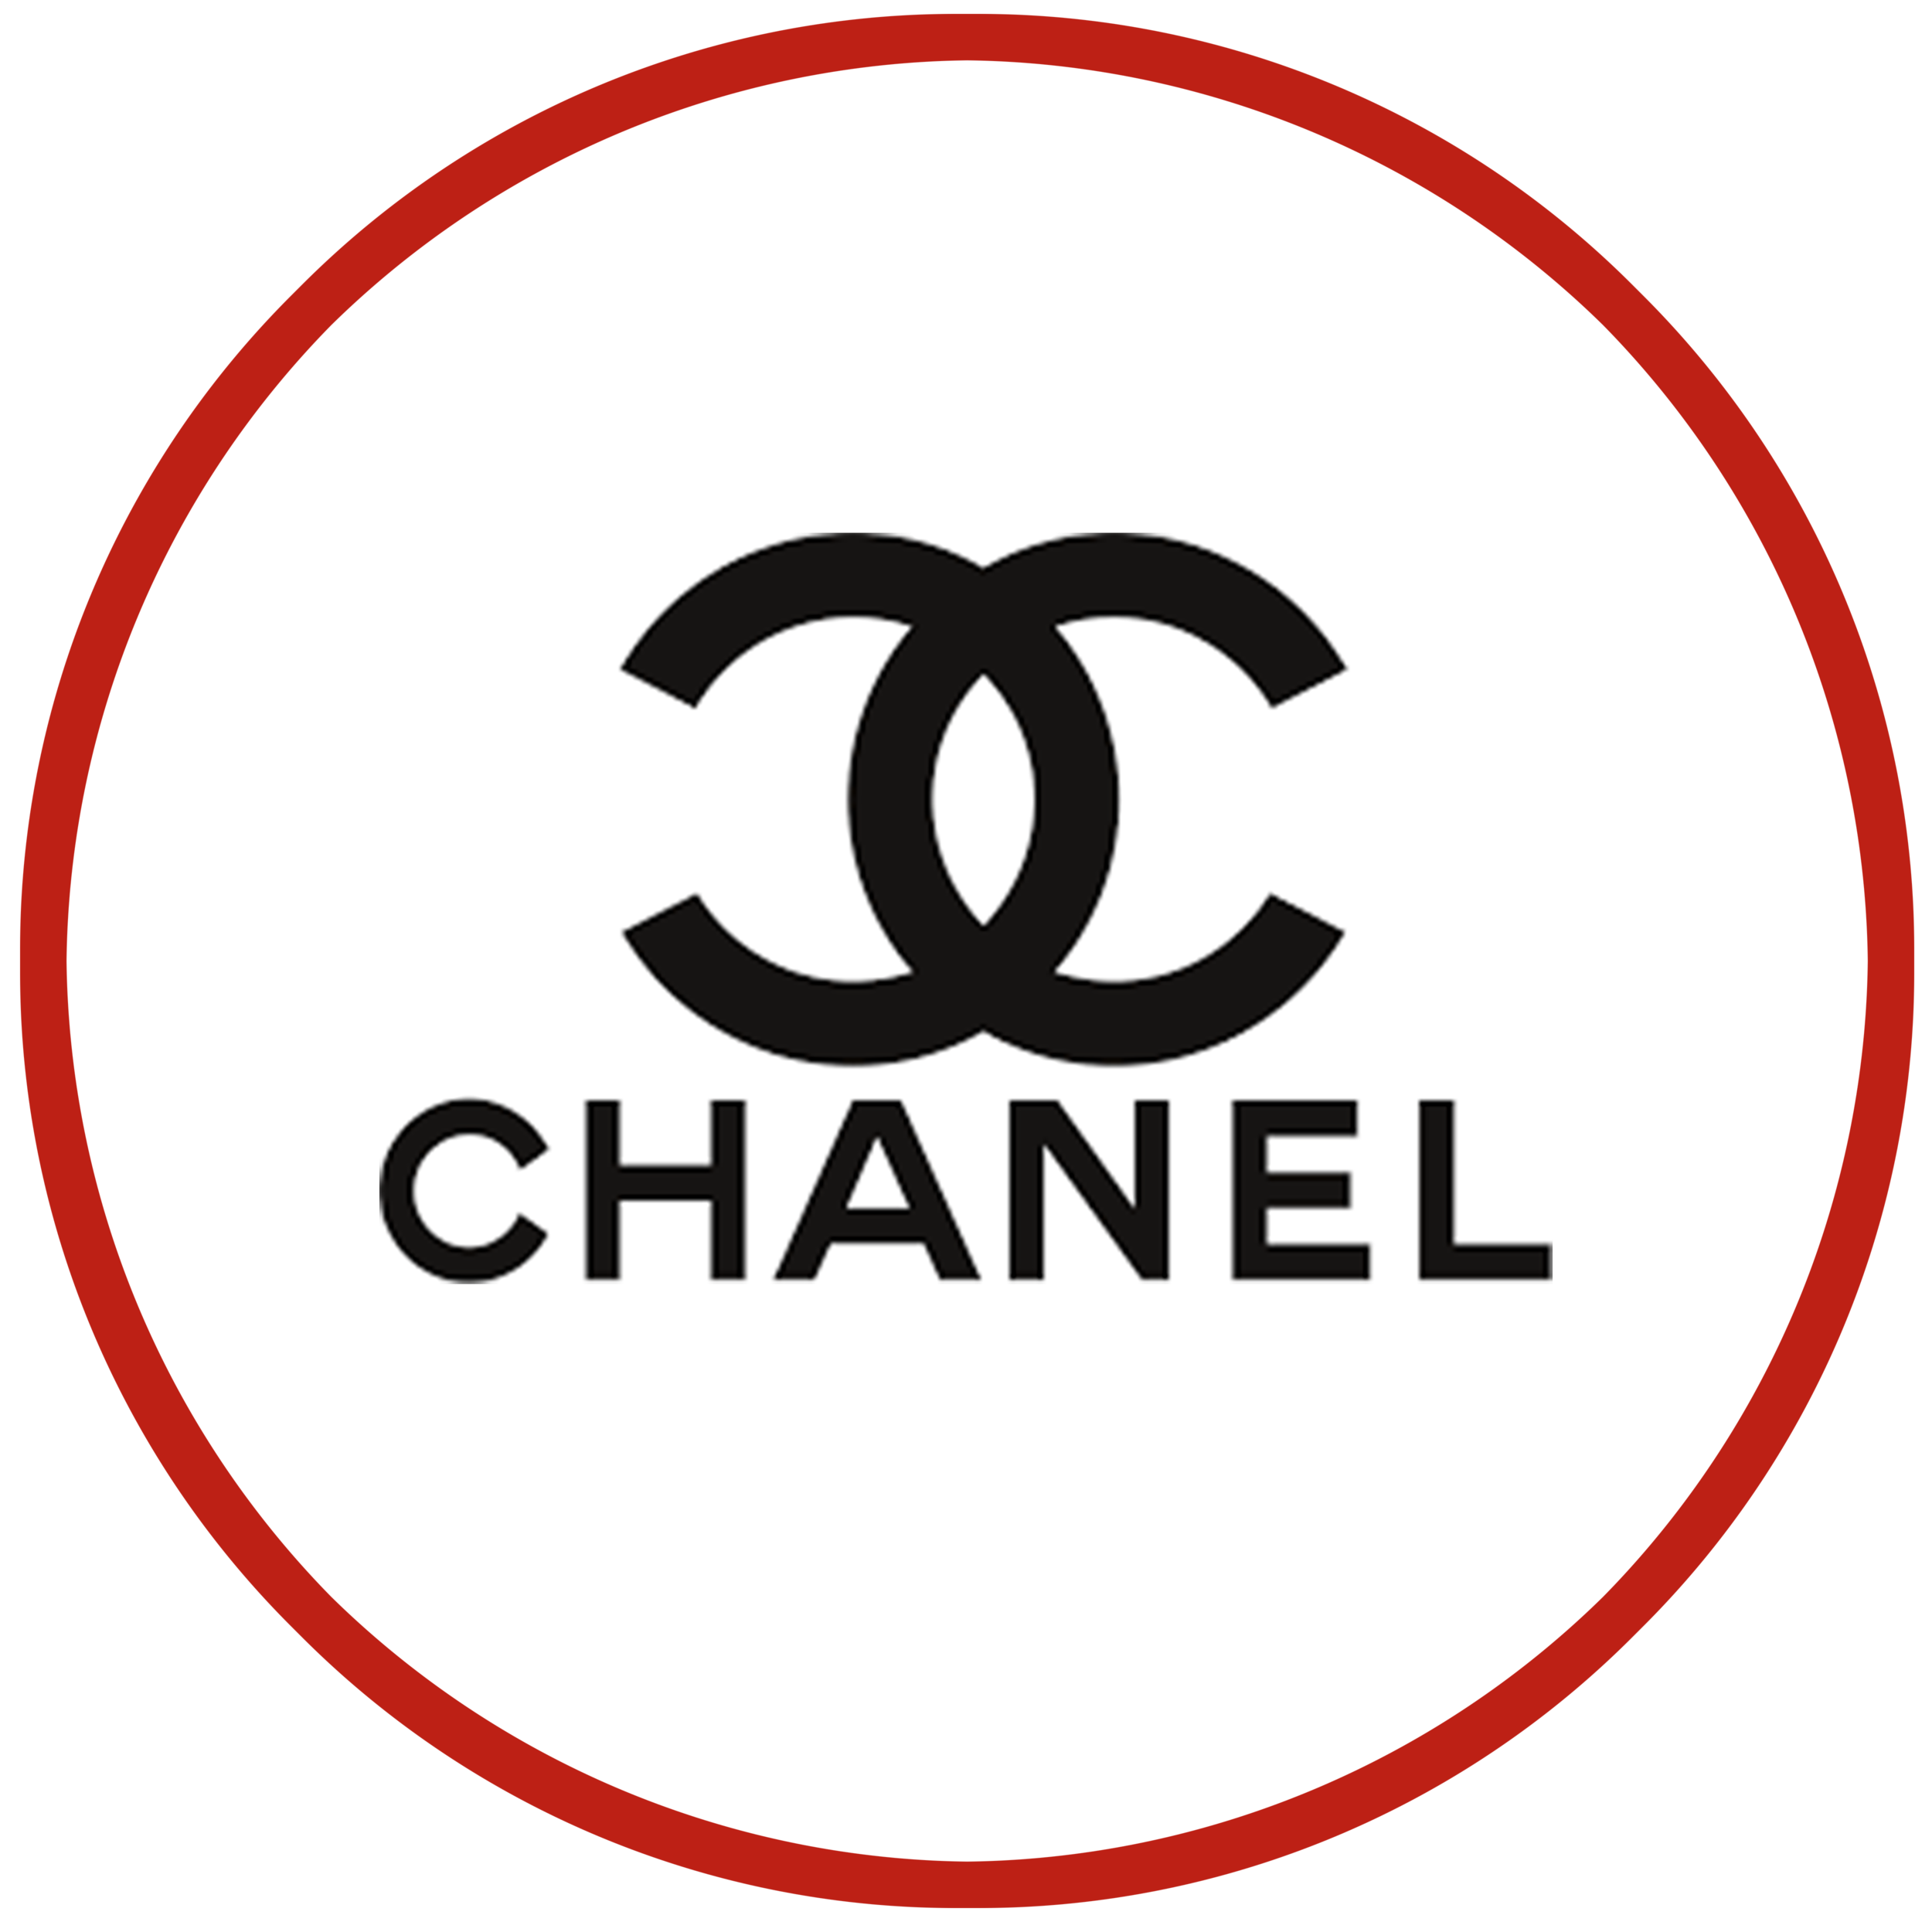 chanel.png